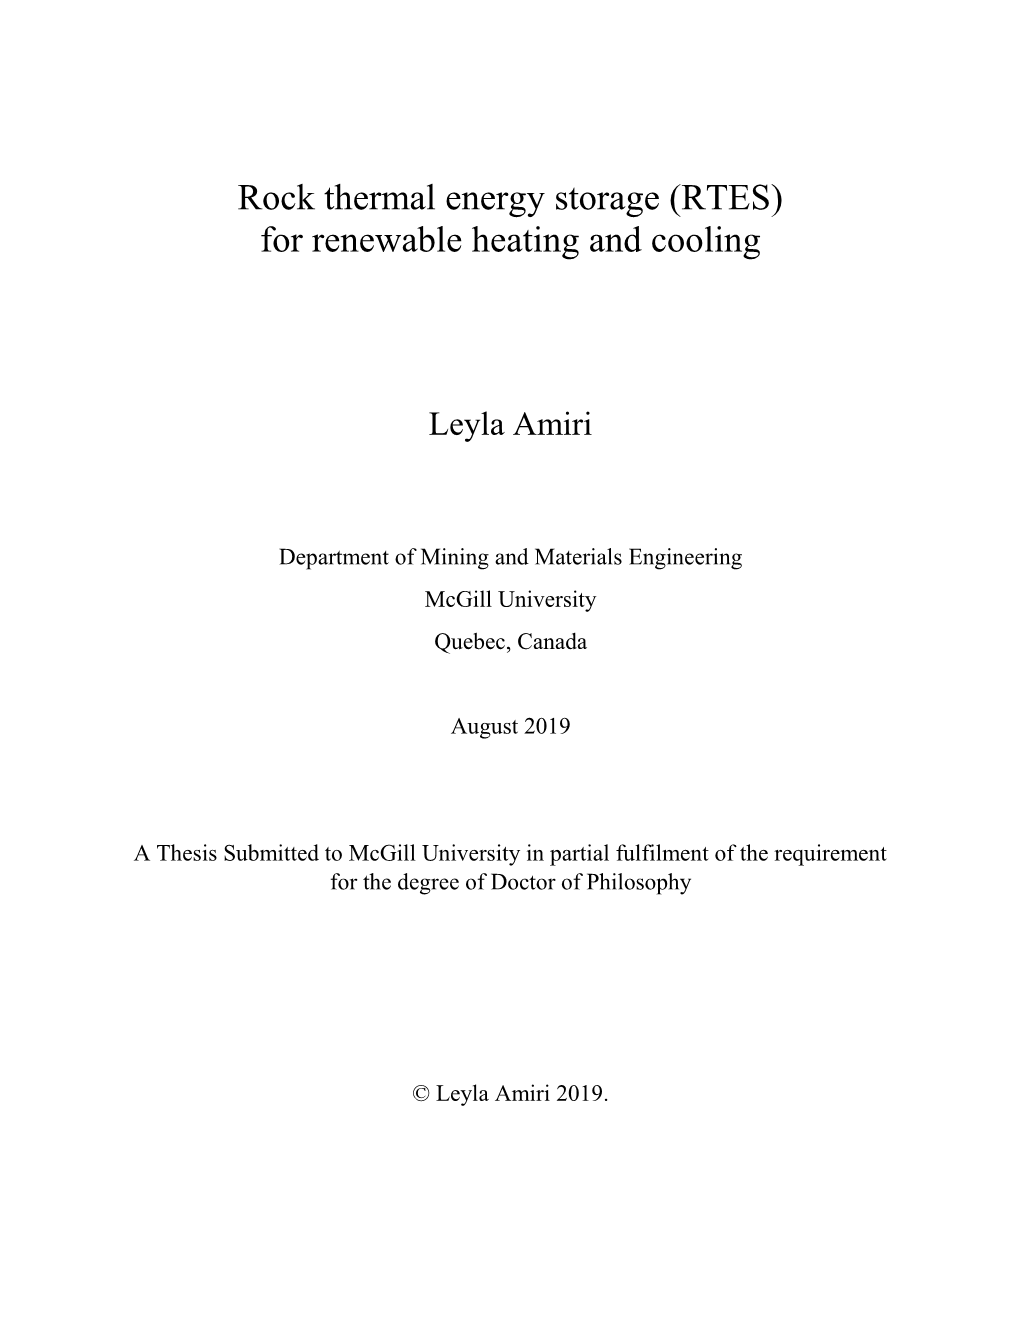 Rock Thermal Energy Storage (RTES) for Renewable Heating and Cooling